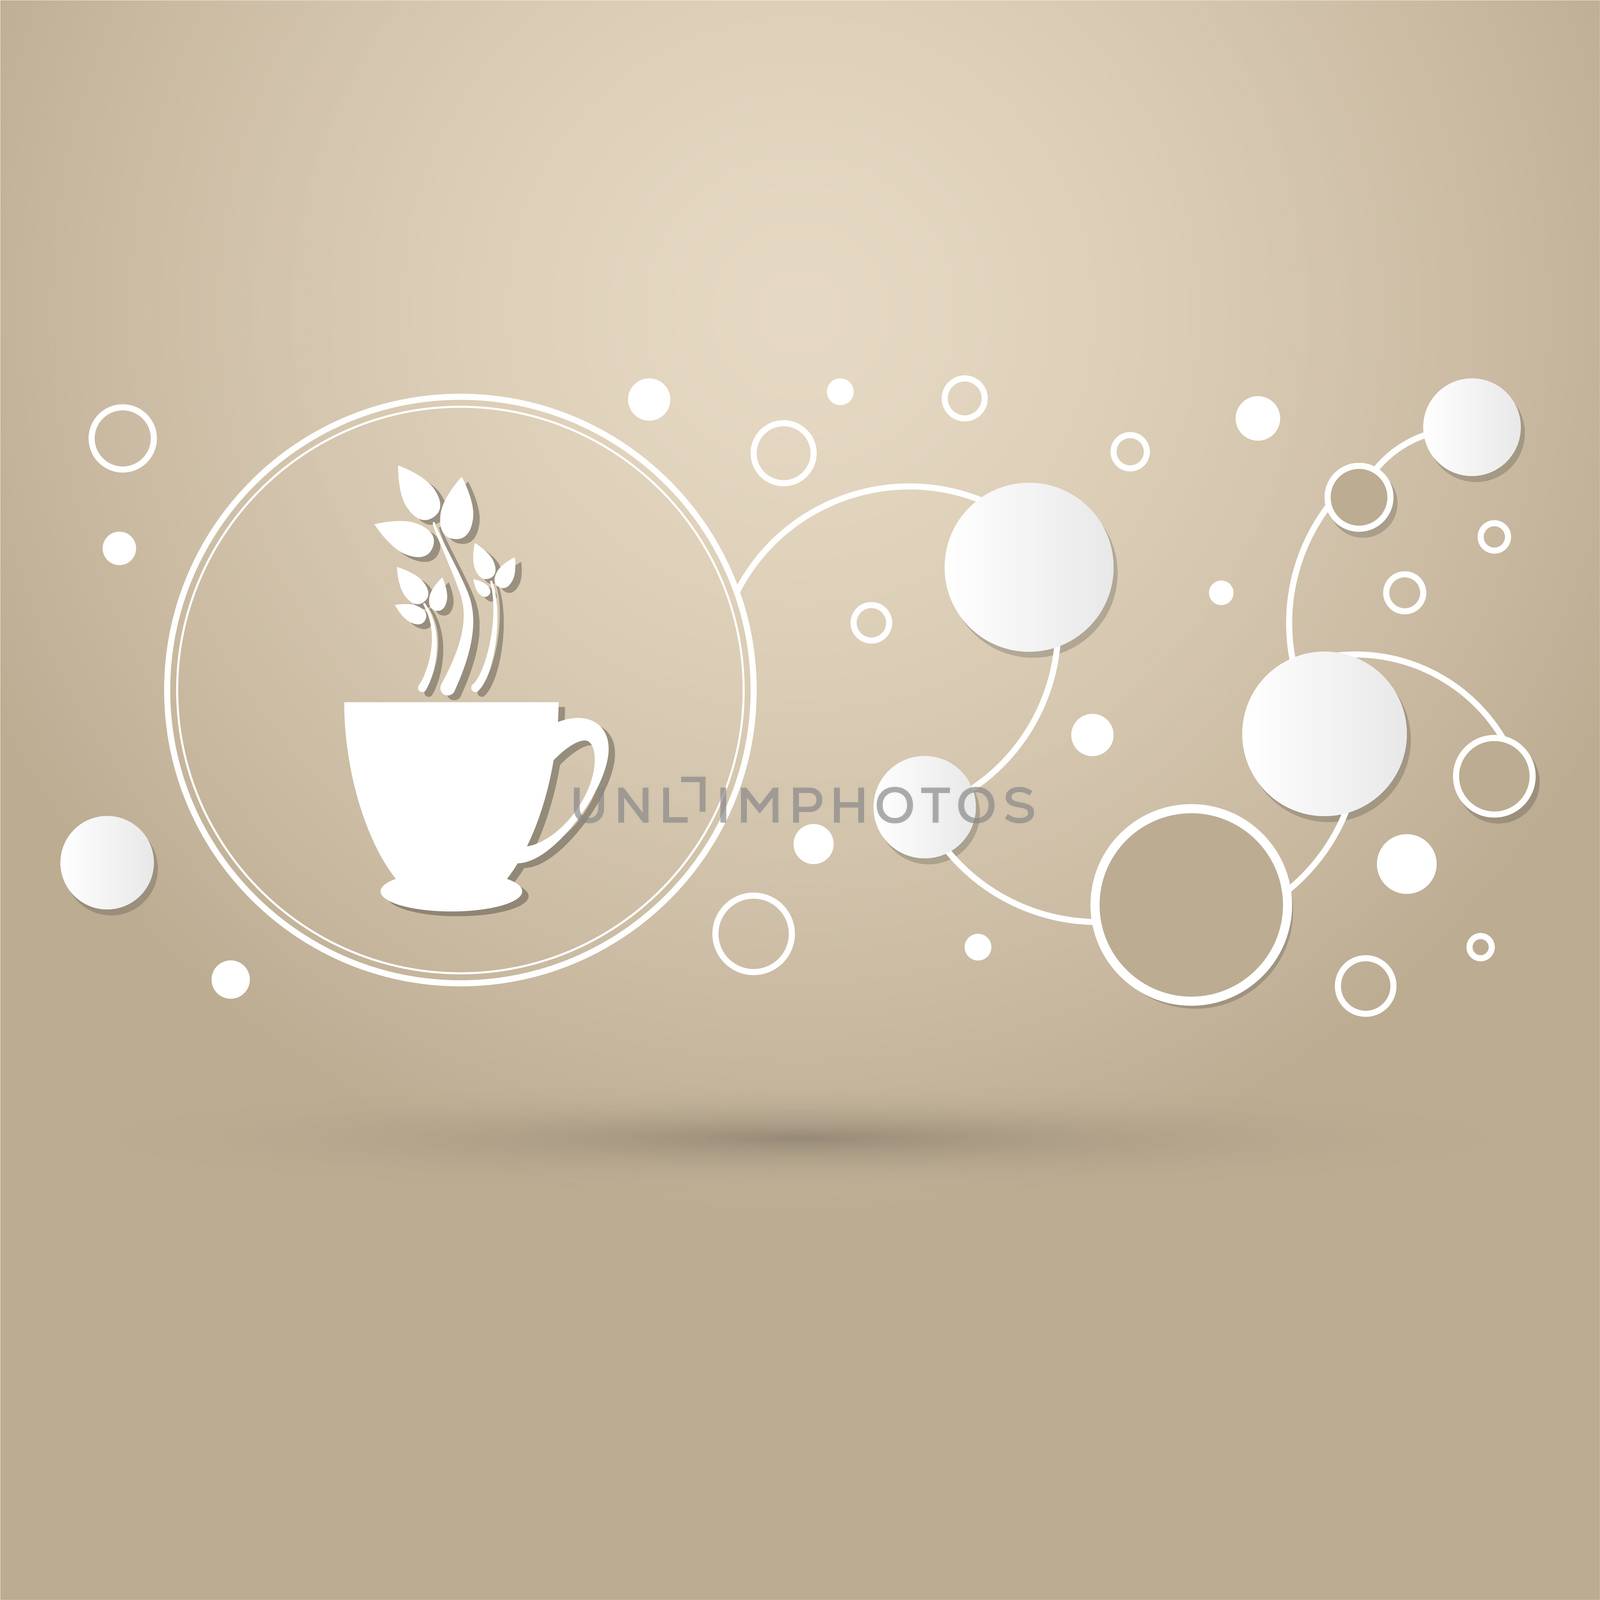 green tea icon on a brown background with elegant style and modern design infographic. illustration